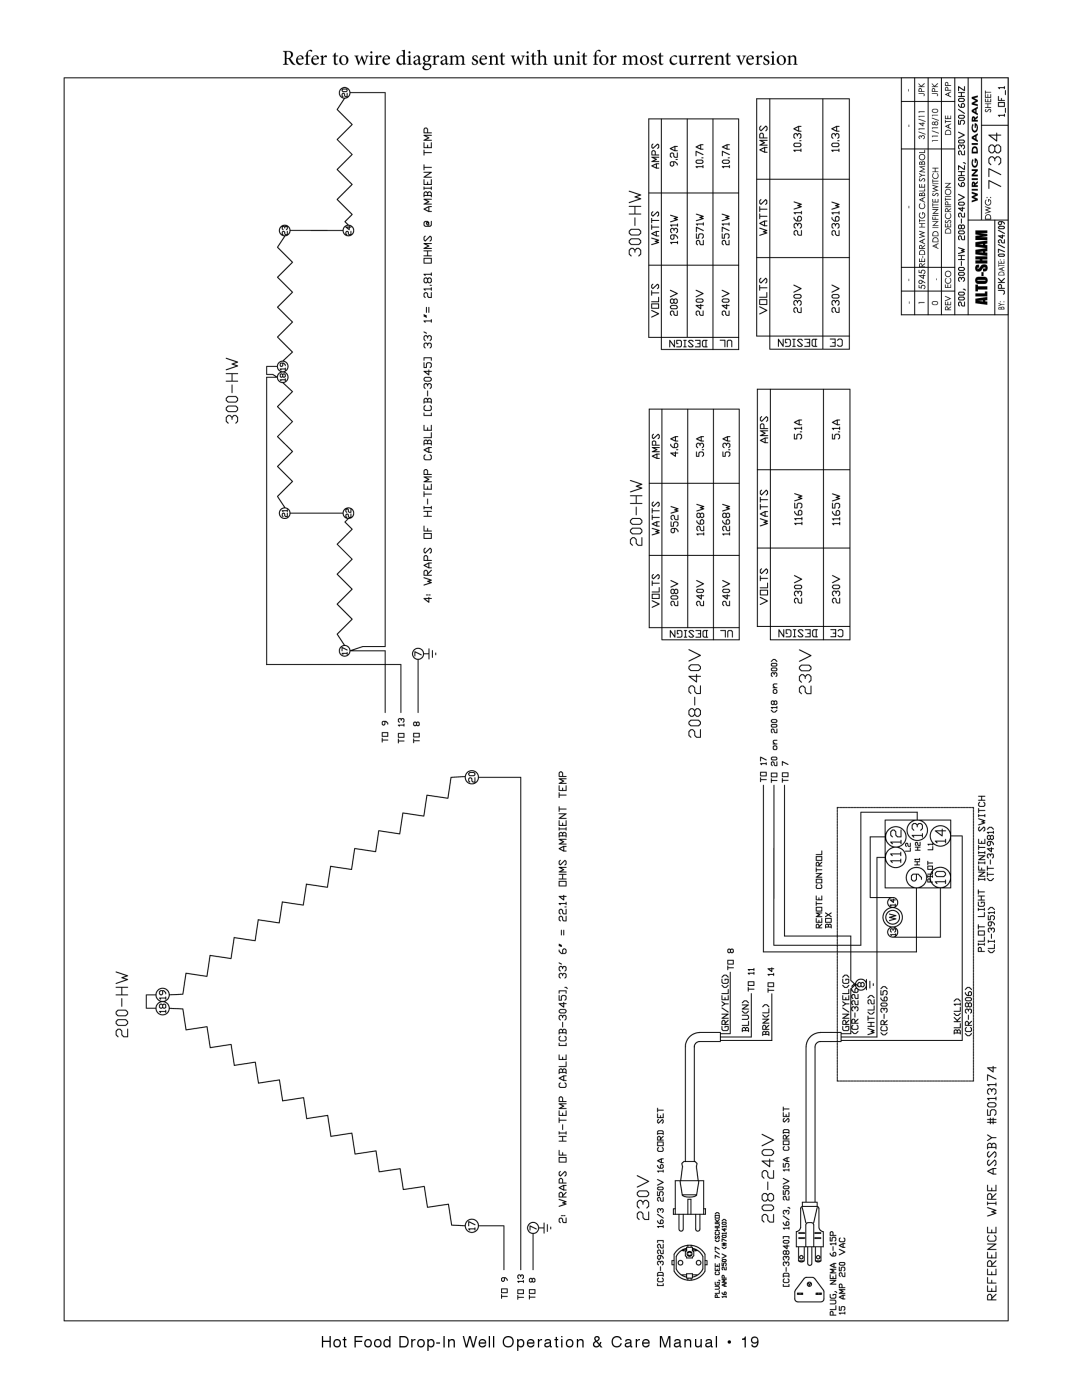 Alto-Shaam 400-HW/D6, 400-HW/D4, 300-HW/D643, 500-HW/D4 manual Refer to wire diagram sent with unit for most current version 